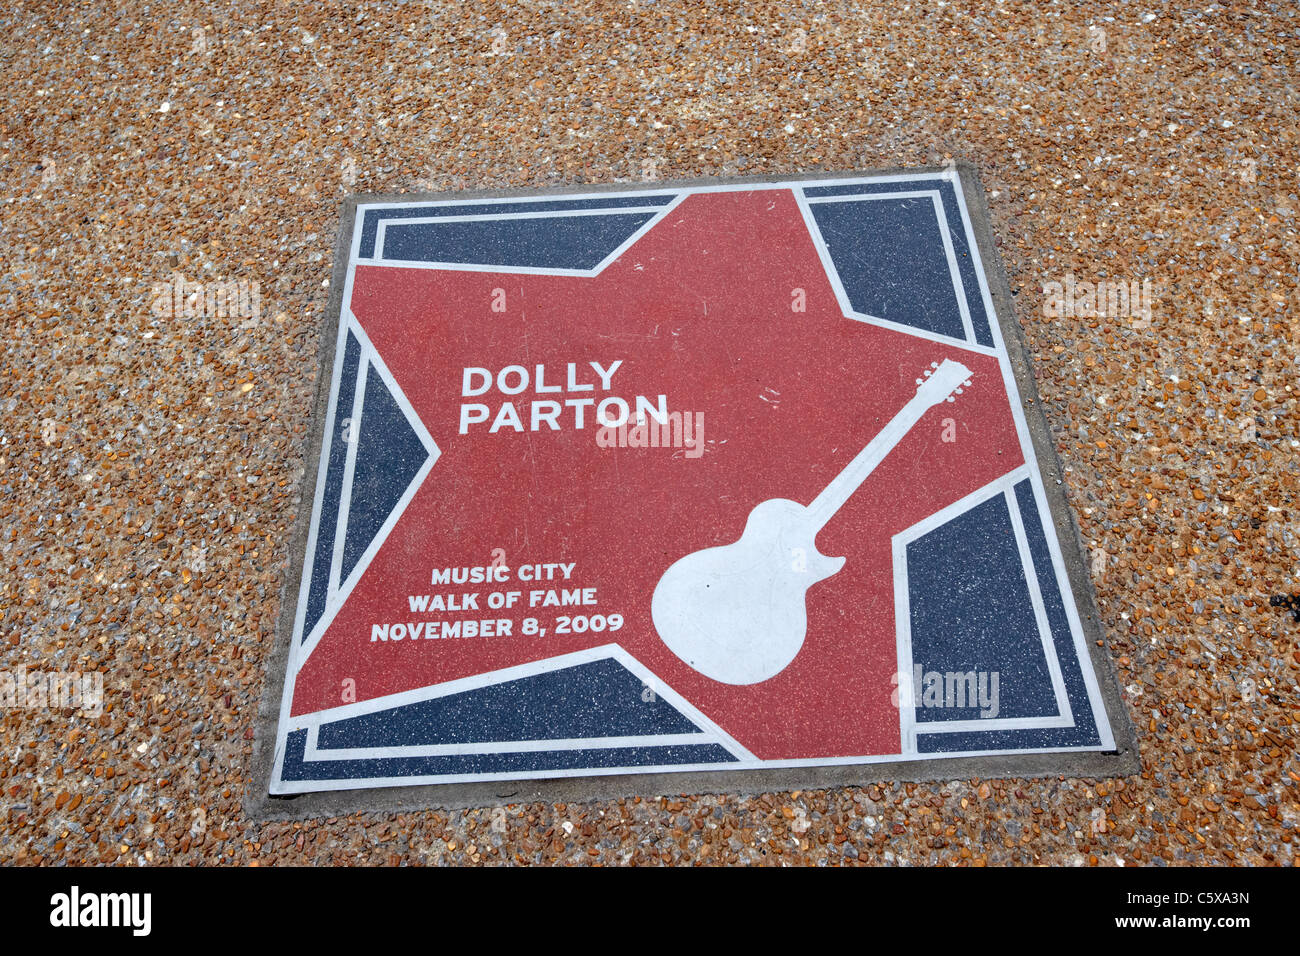 dolly parton star on the music city walk of fame Nashville Tennessee USA Stock Photo